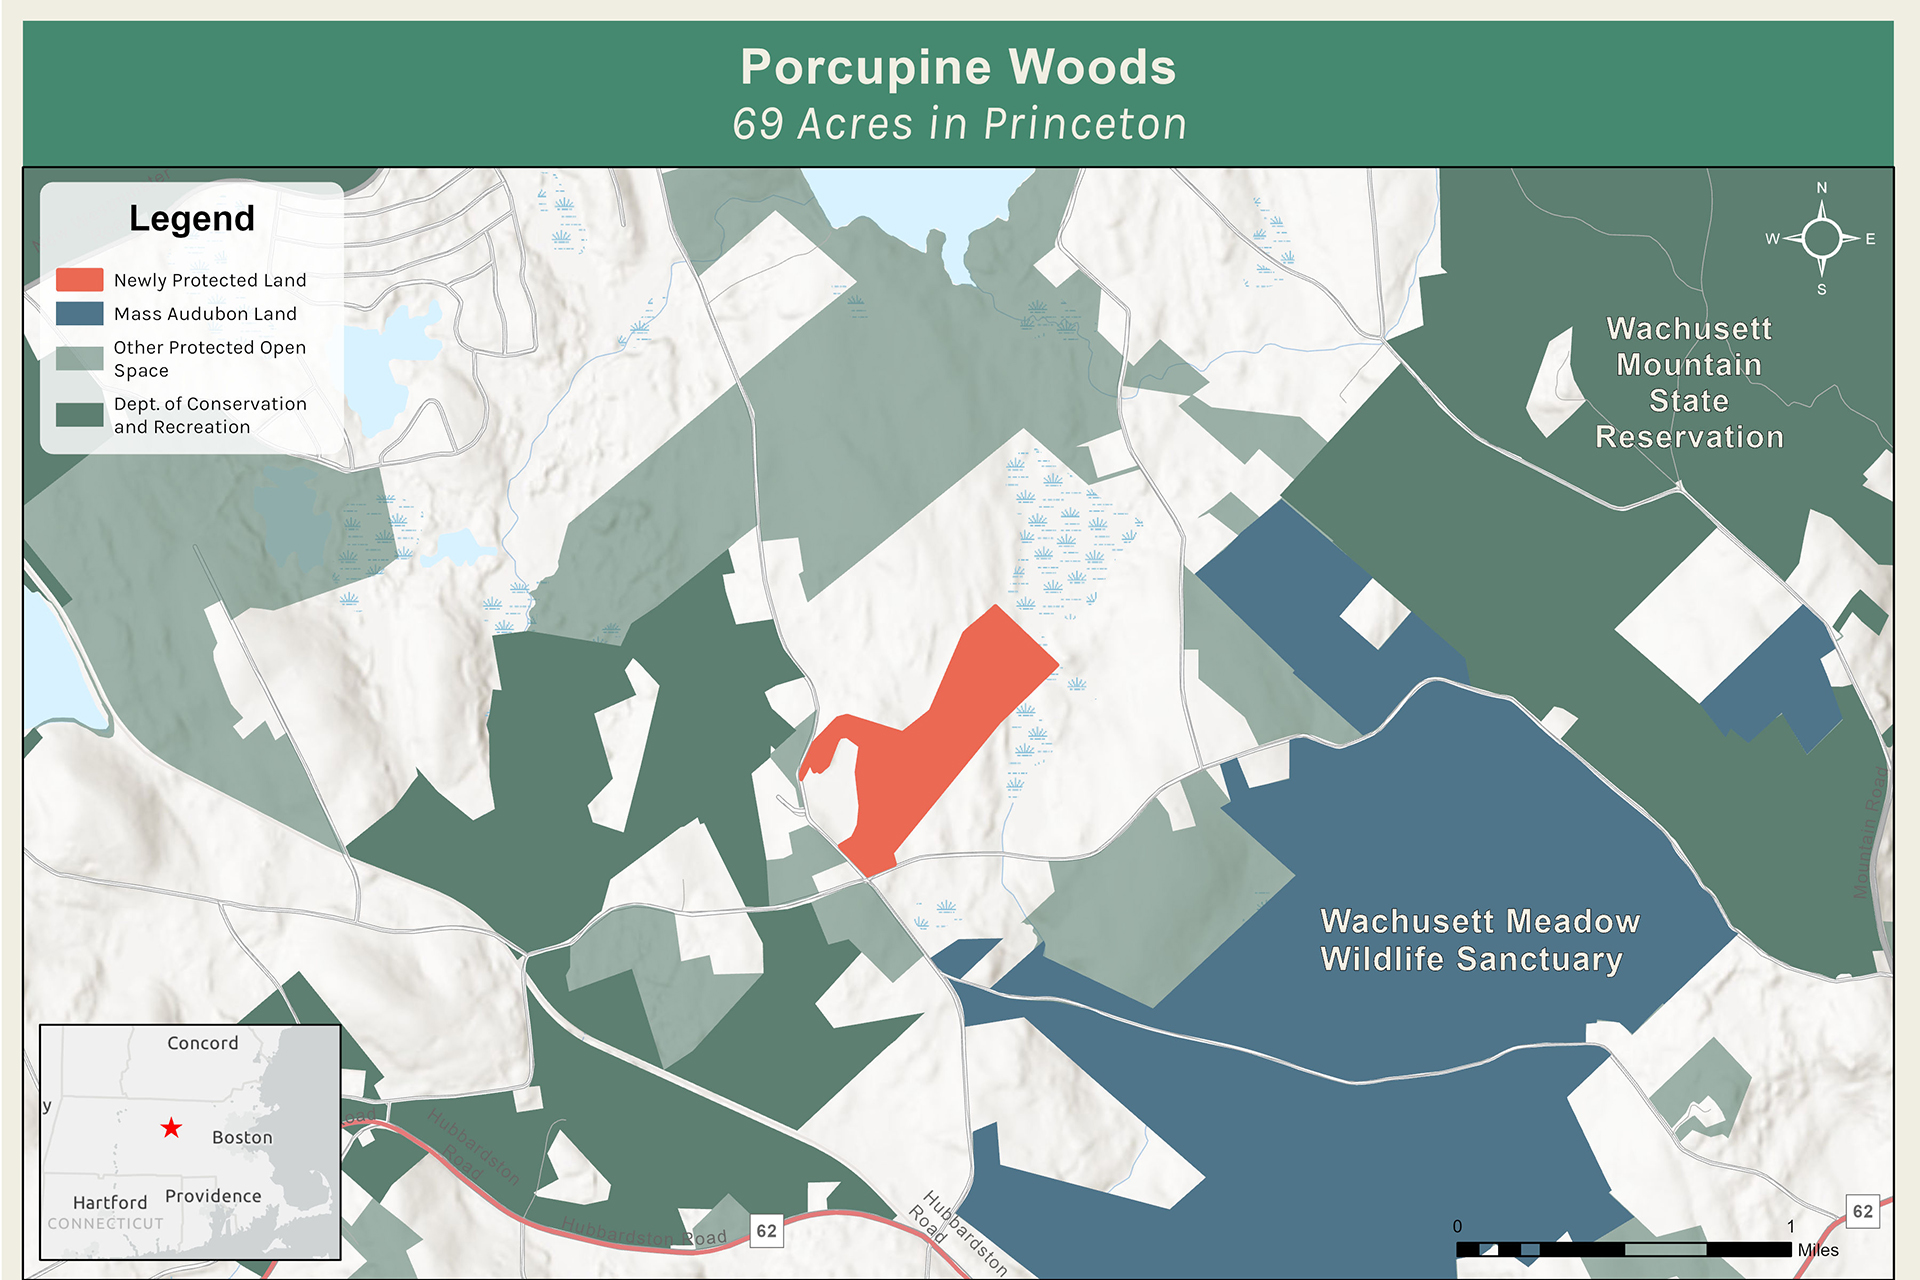 Map of conservation area protected by Porcupine Woods